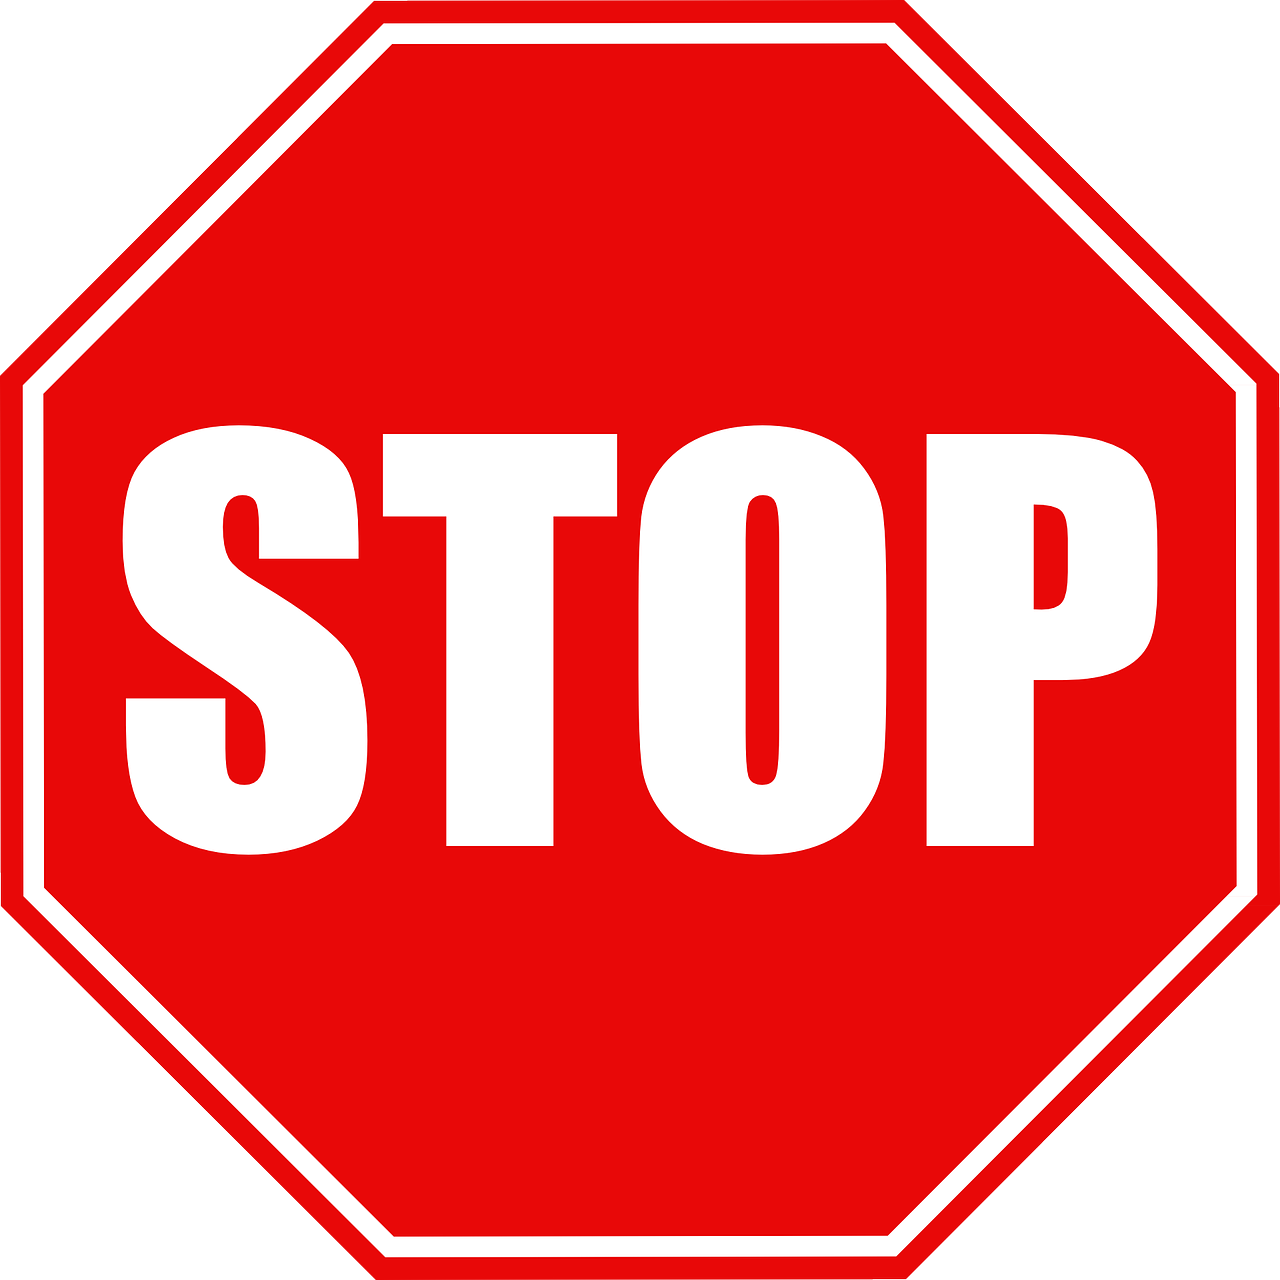 Customs Stop Road Sign PNG Clipart Background